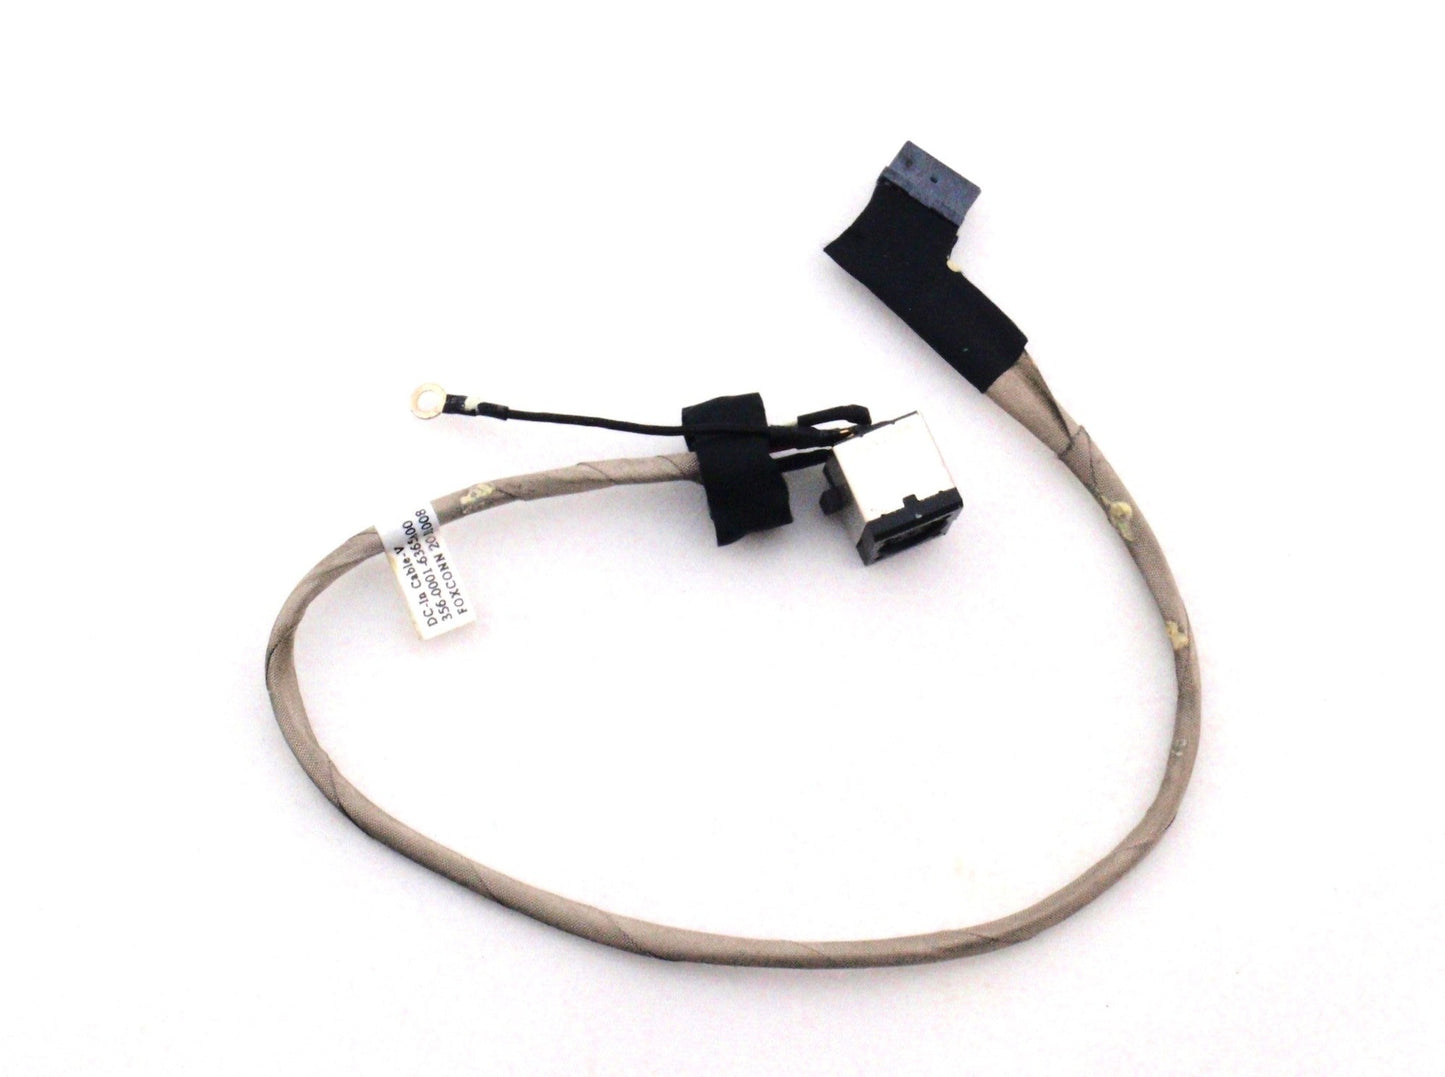 Dell New DC In Power Jack Charging Port Connector Socket Cable Harness V2 Studio 1450 1457 1458 356-0001-6365_A00